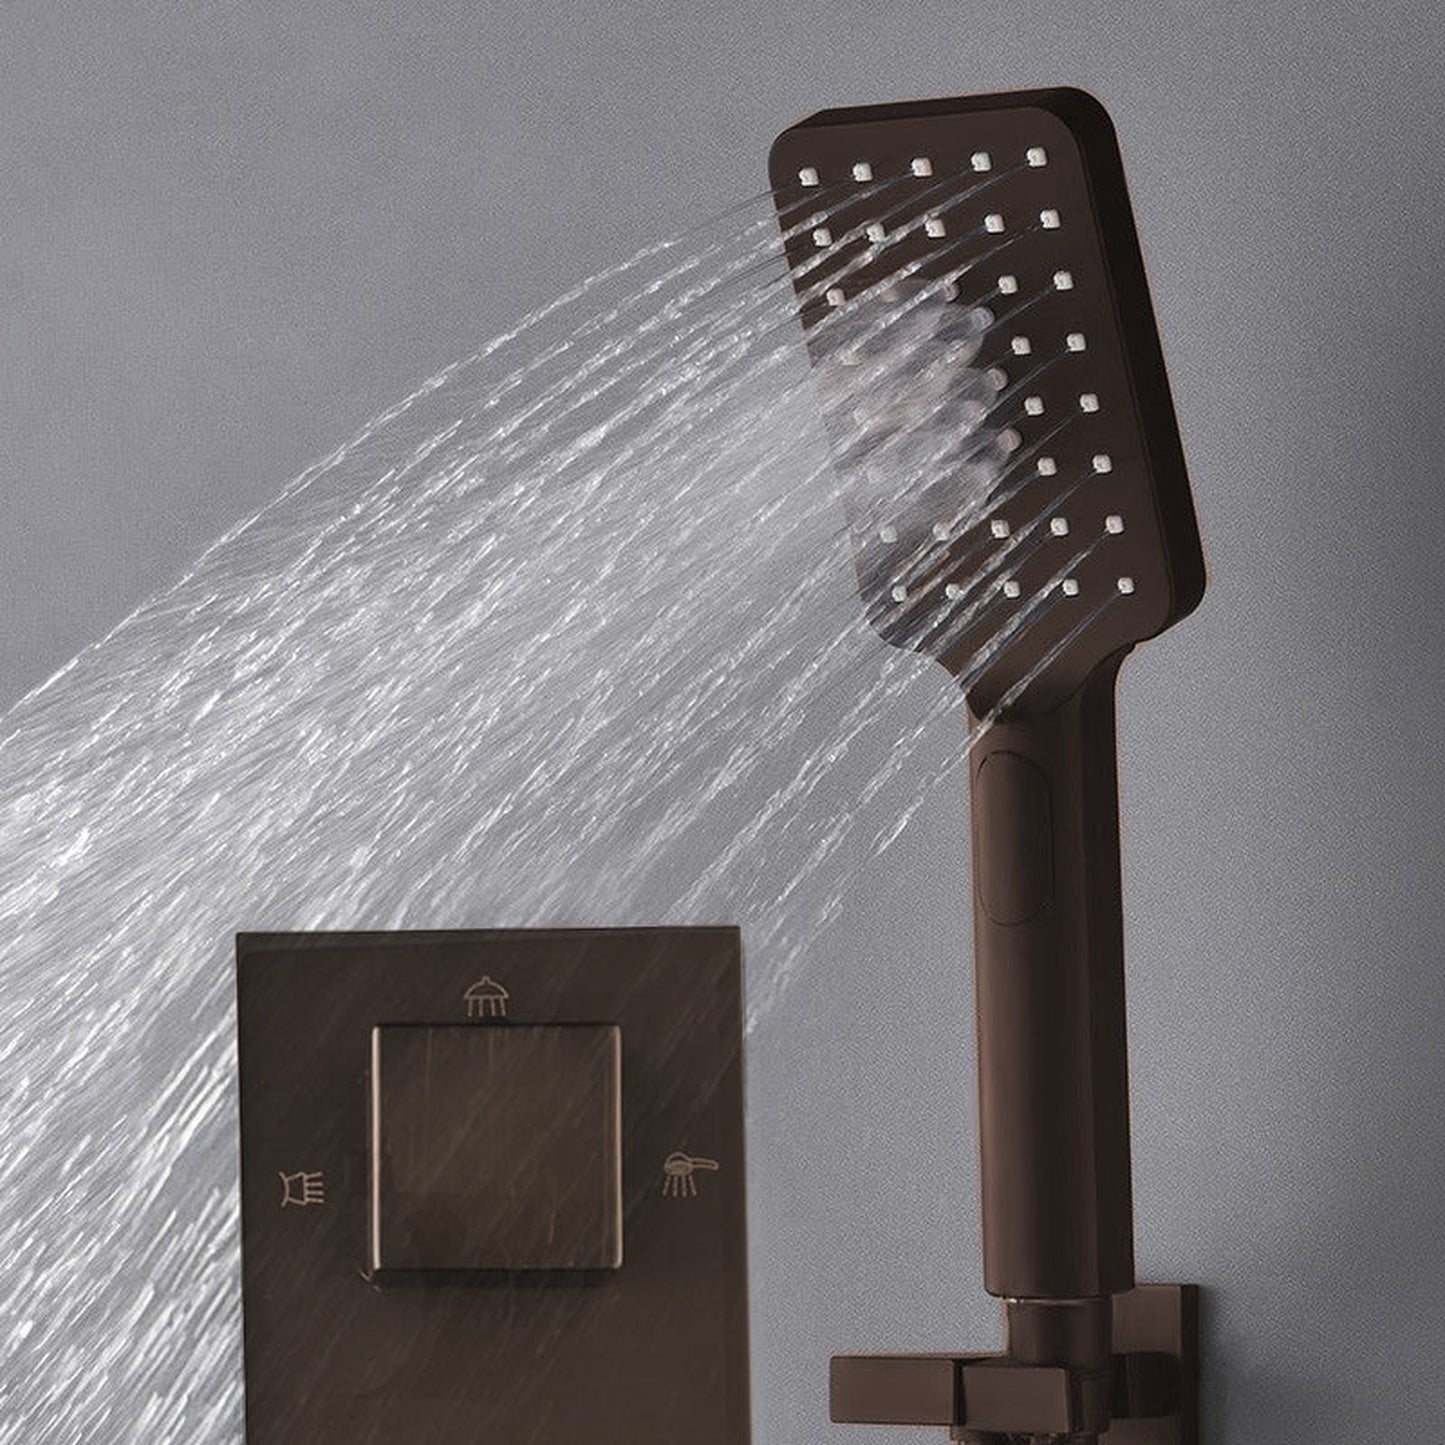 Fontana Sierra 8" Light Oil Rubbed Bronze Square Wall-Mounted LED Shower System With 6-Jet Body Sprays and Hand Shower